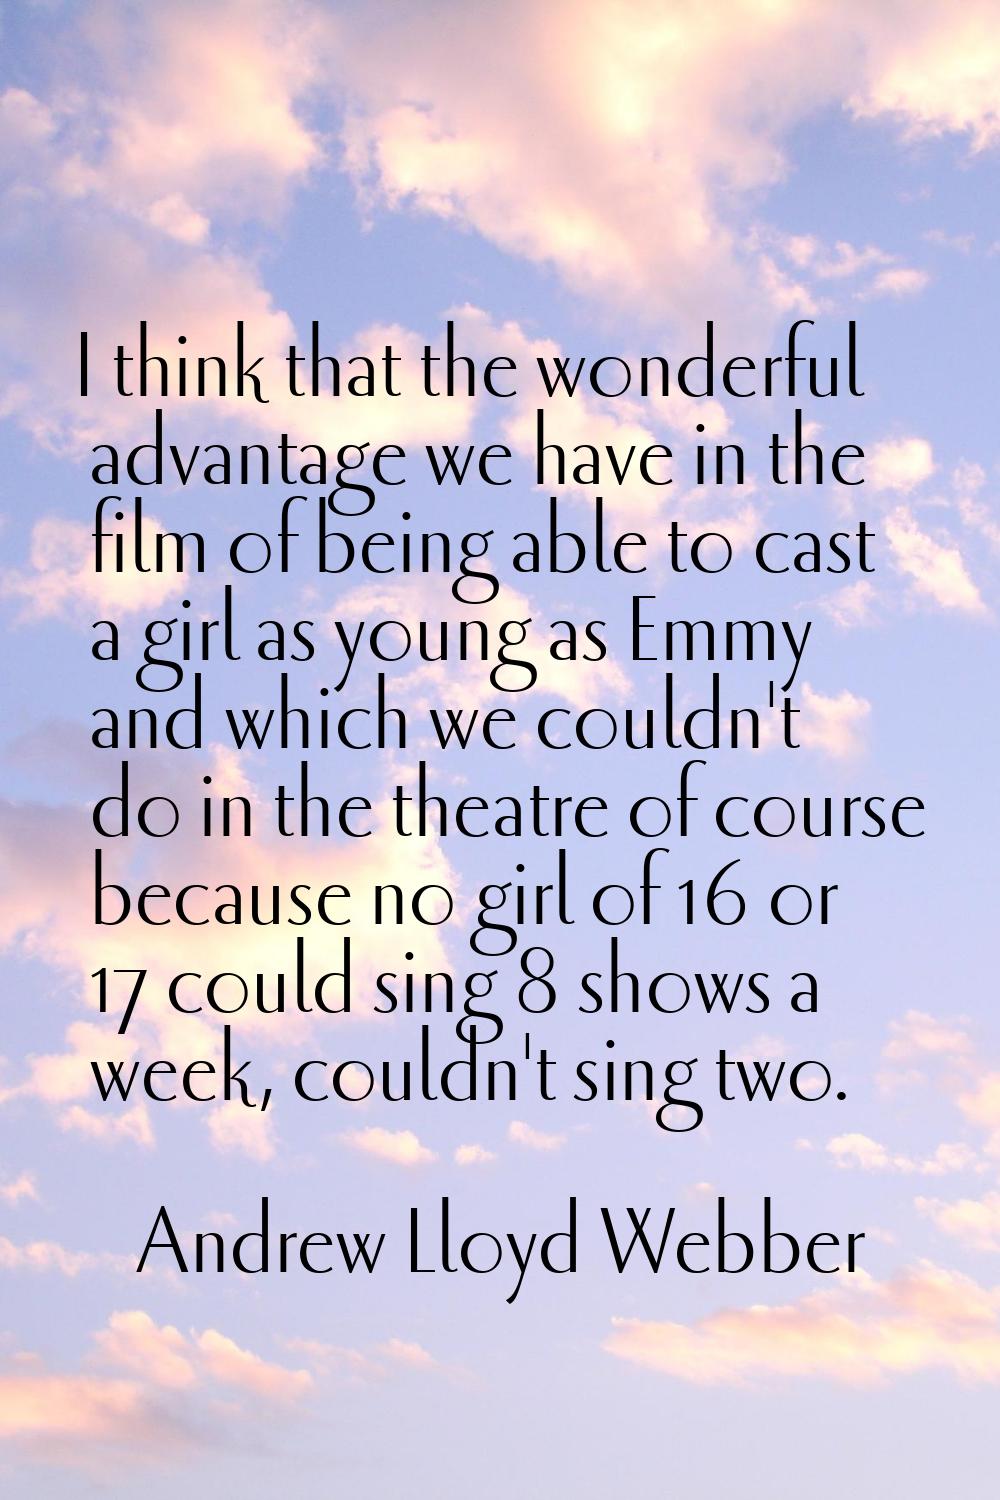 I think that the wonderful advantage we have in the film of being able to cast a girl as young as E